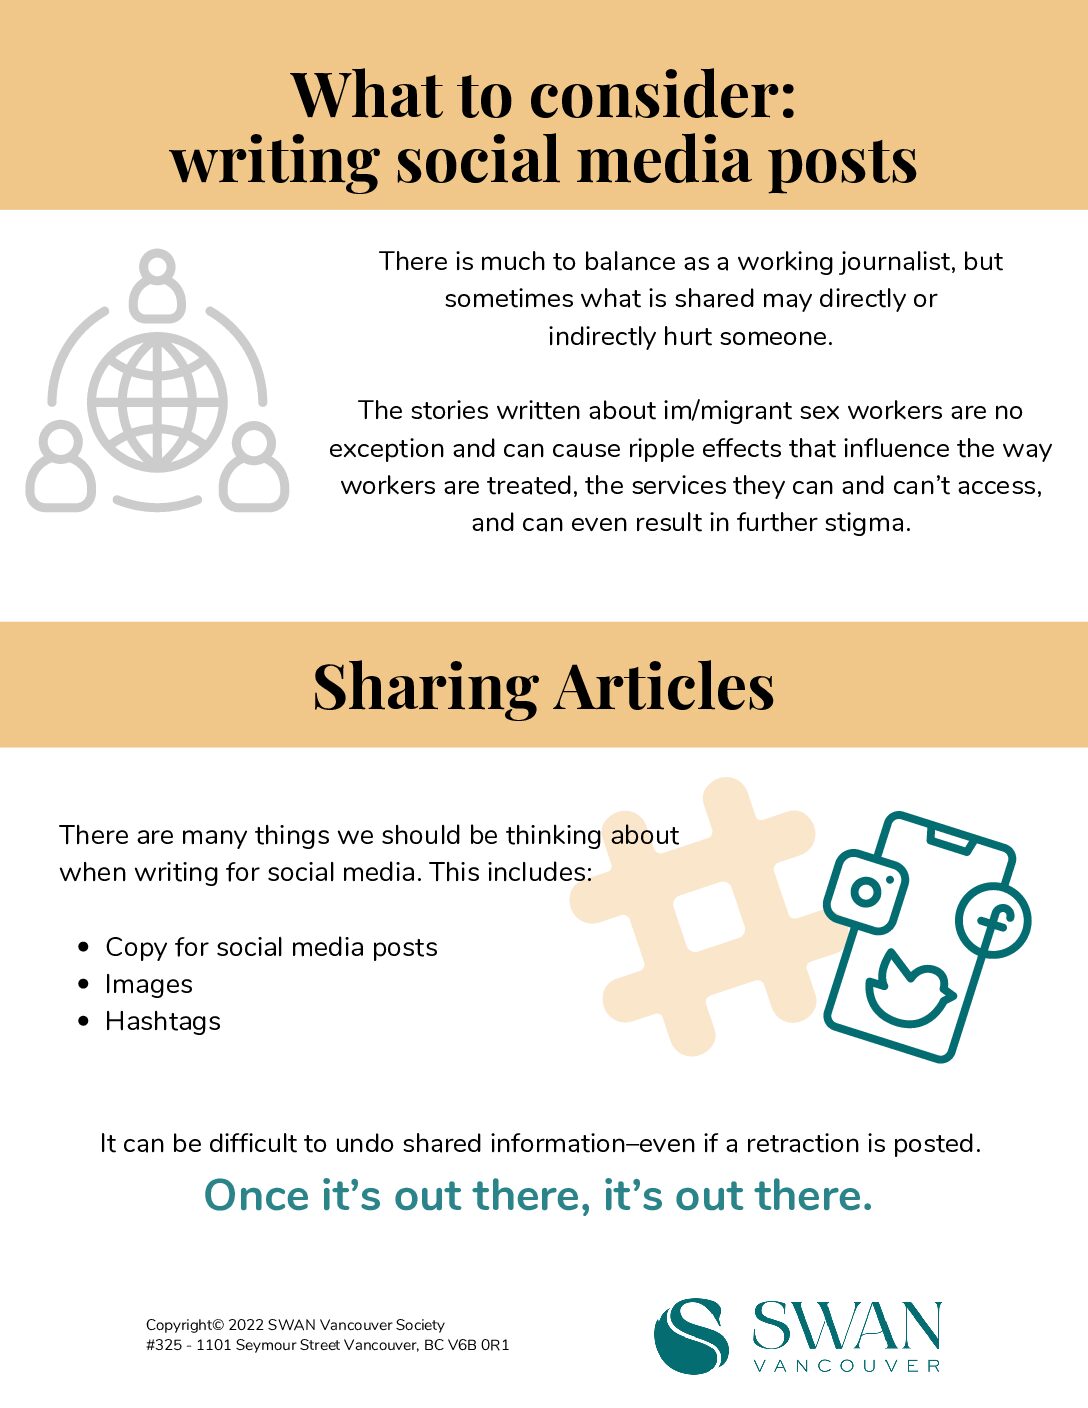 What to Consider When Writing Social Media Posts PDF resource